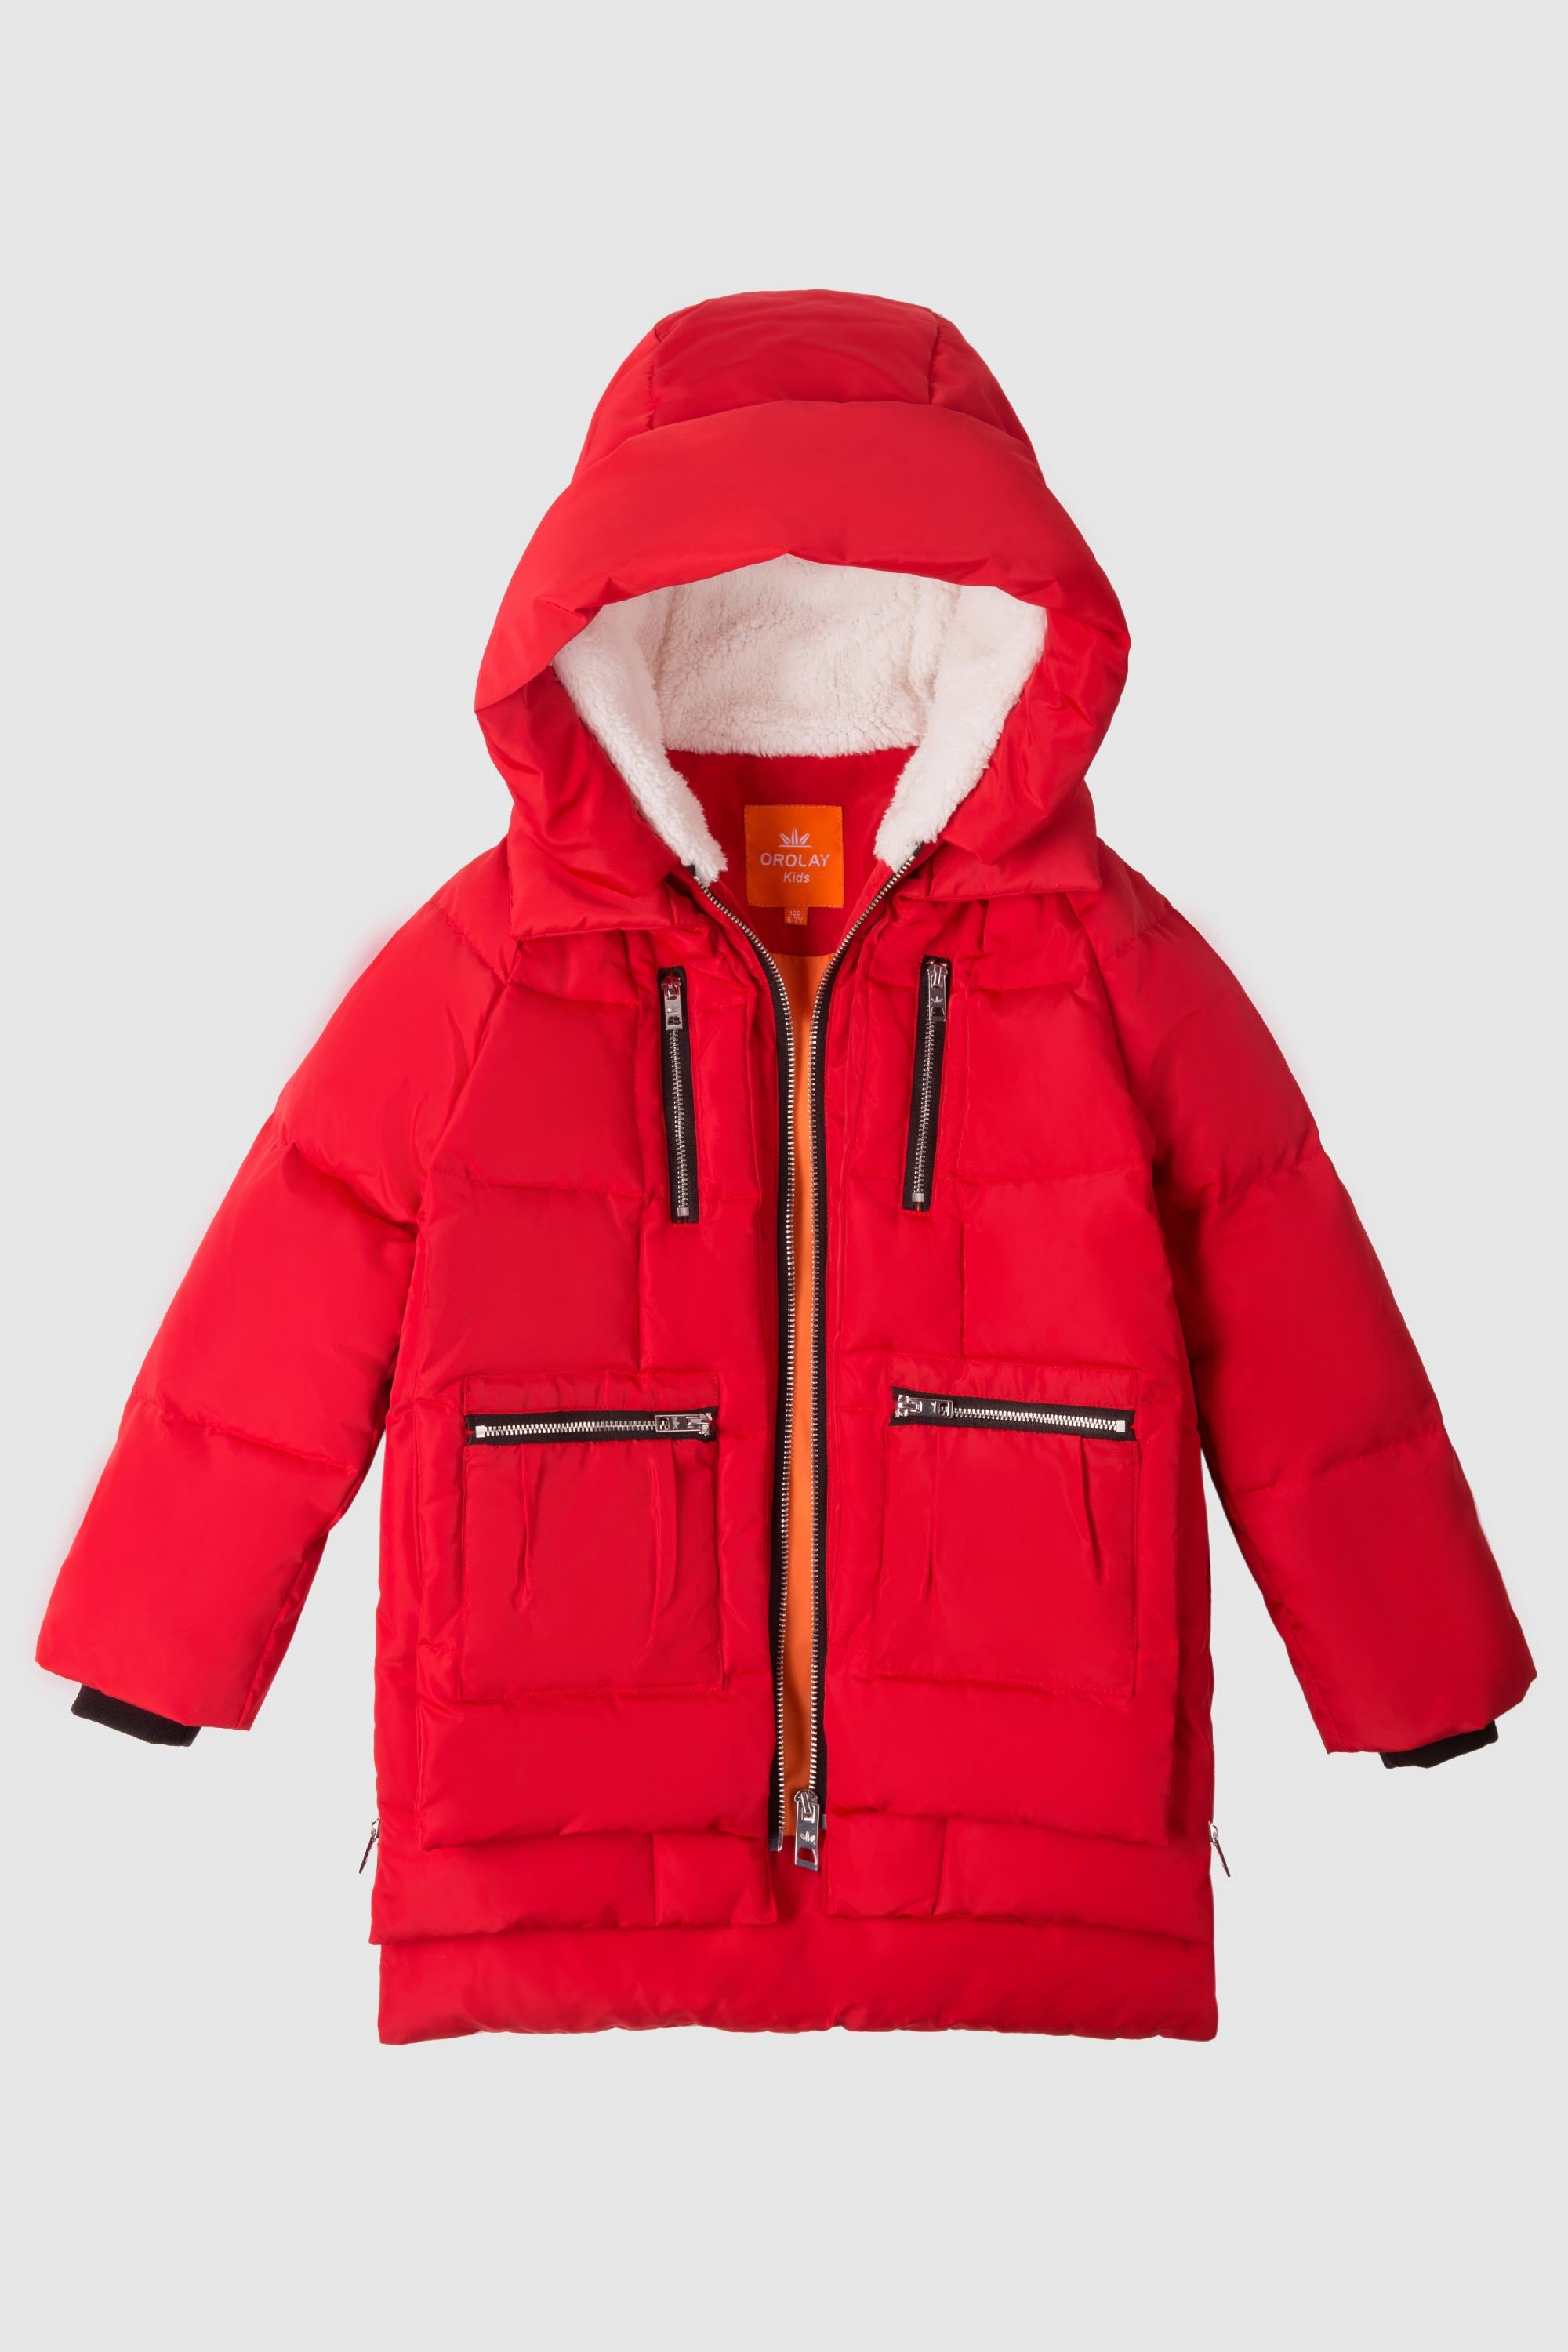 092 Universe Classics Children Thickened Hooded Down Coat